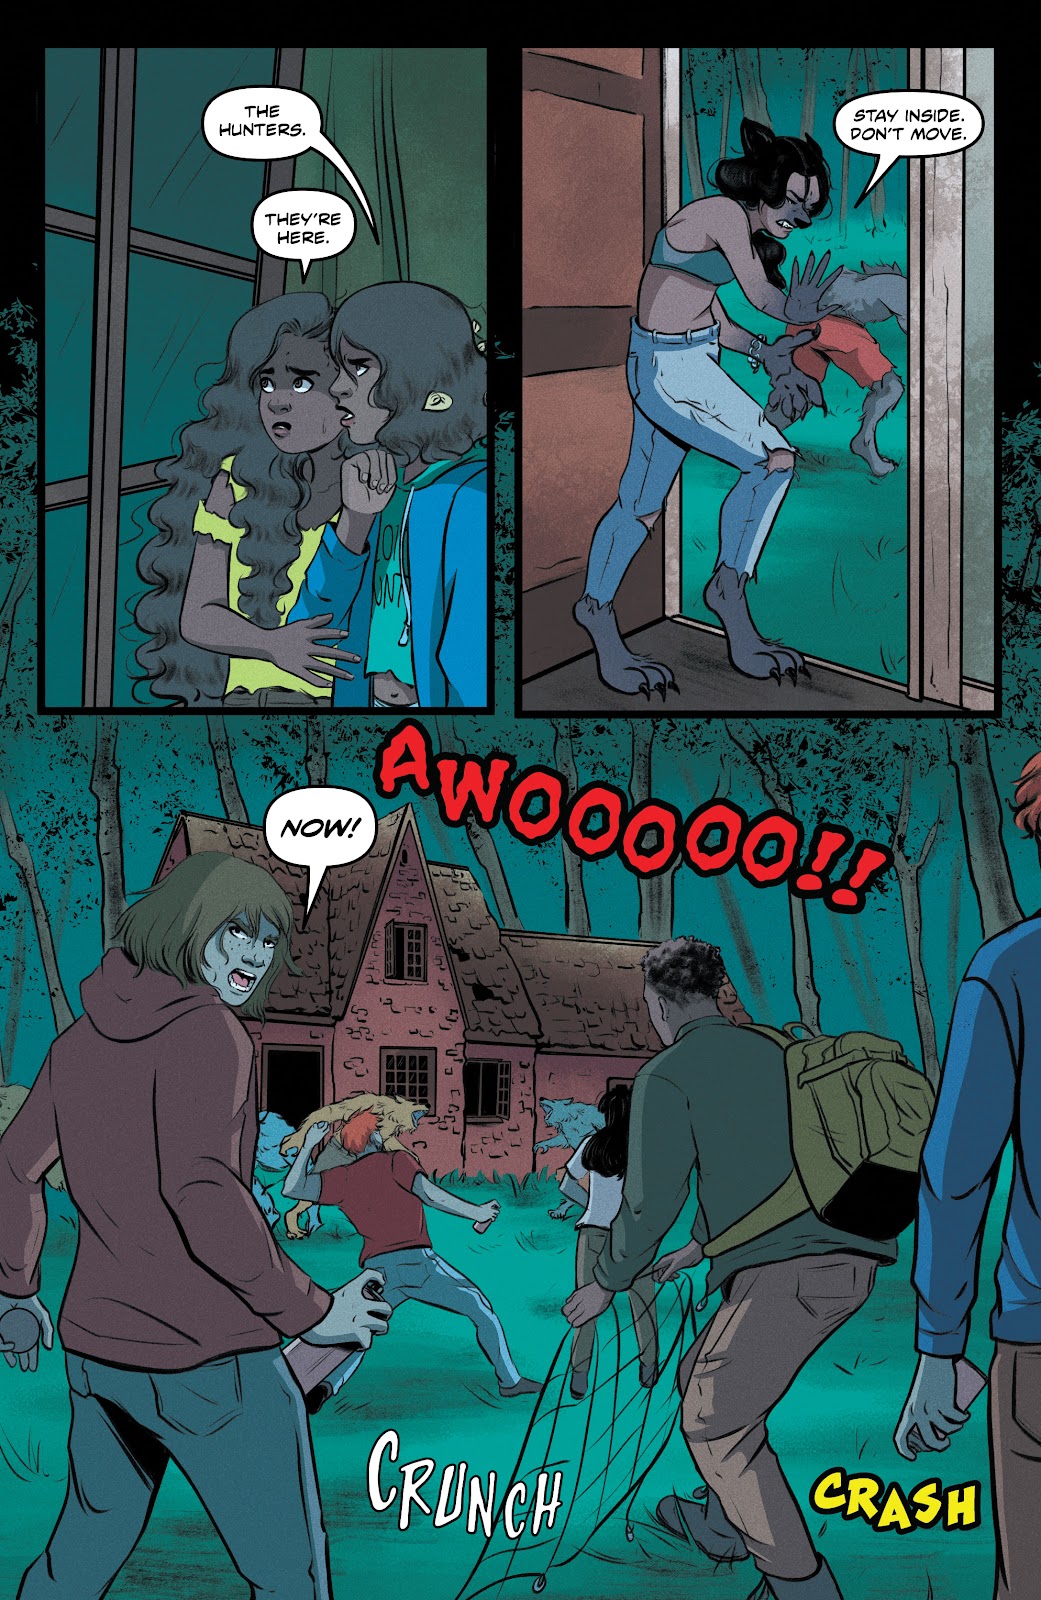 Goosebumps: Secrets of the Swamp issue 4 - Page 9